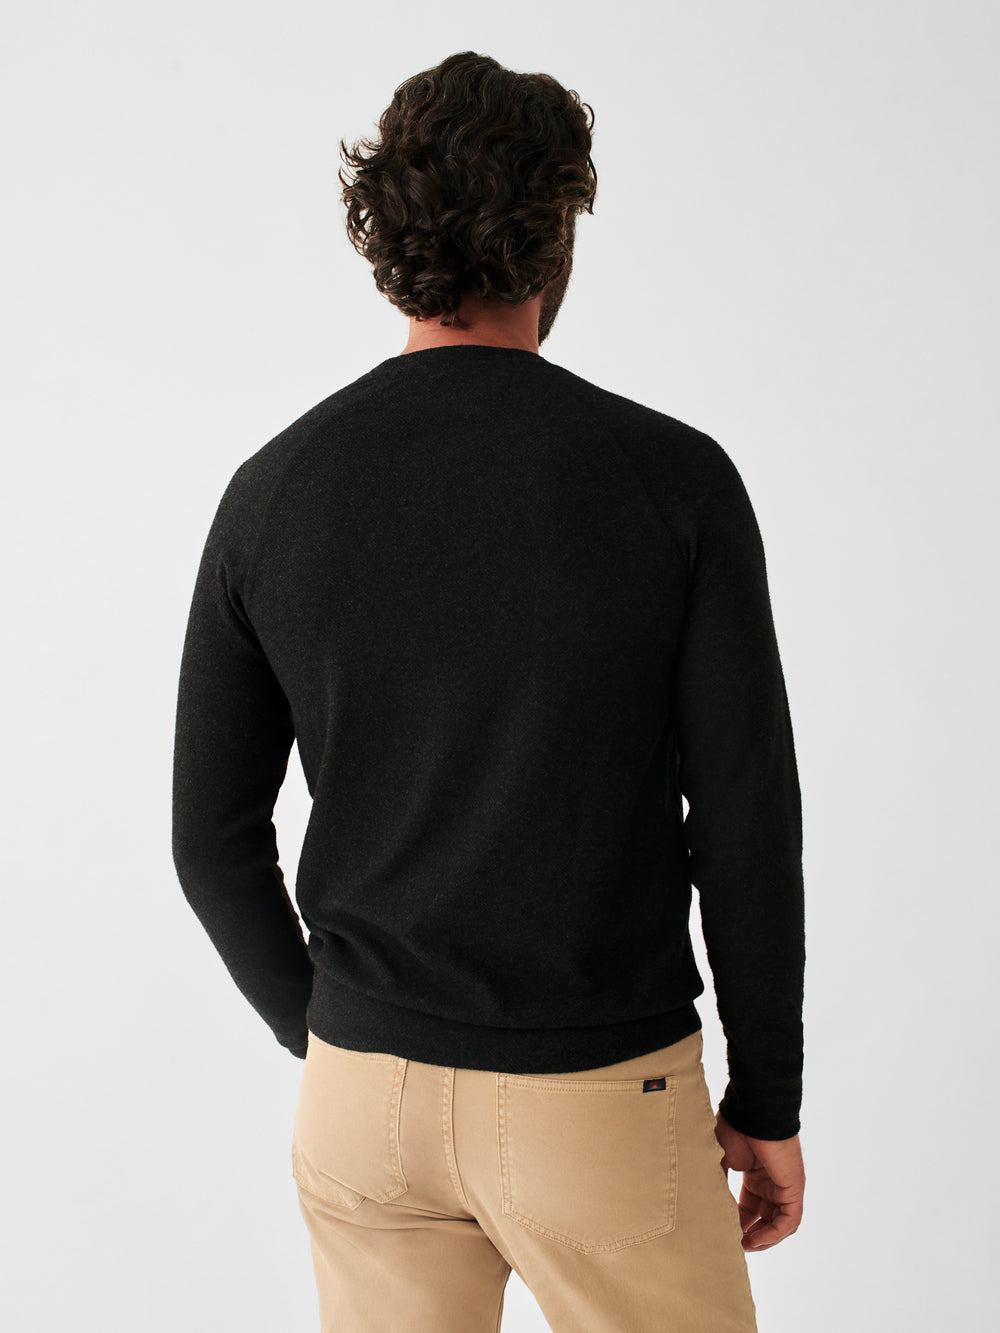 LEGEND CREW SWEATER-HEATHERED BLACK TWILL - Kingfisher Road - Online Boutique